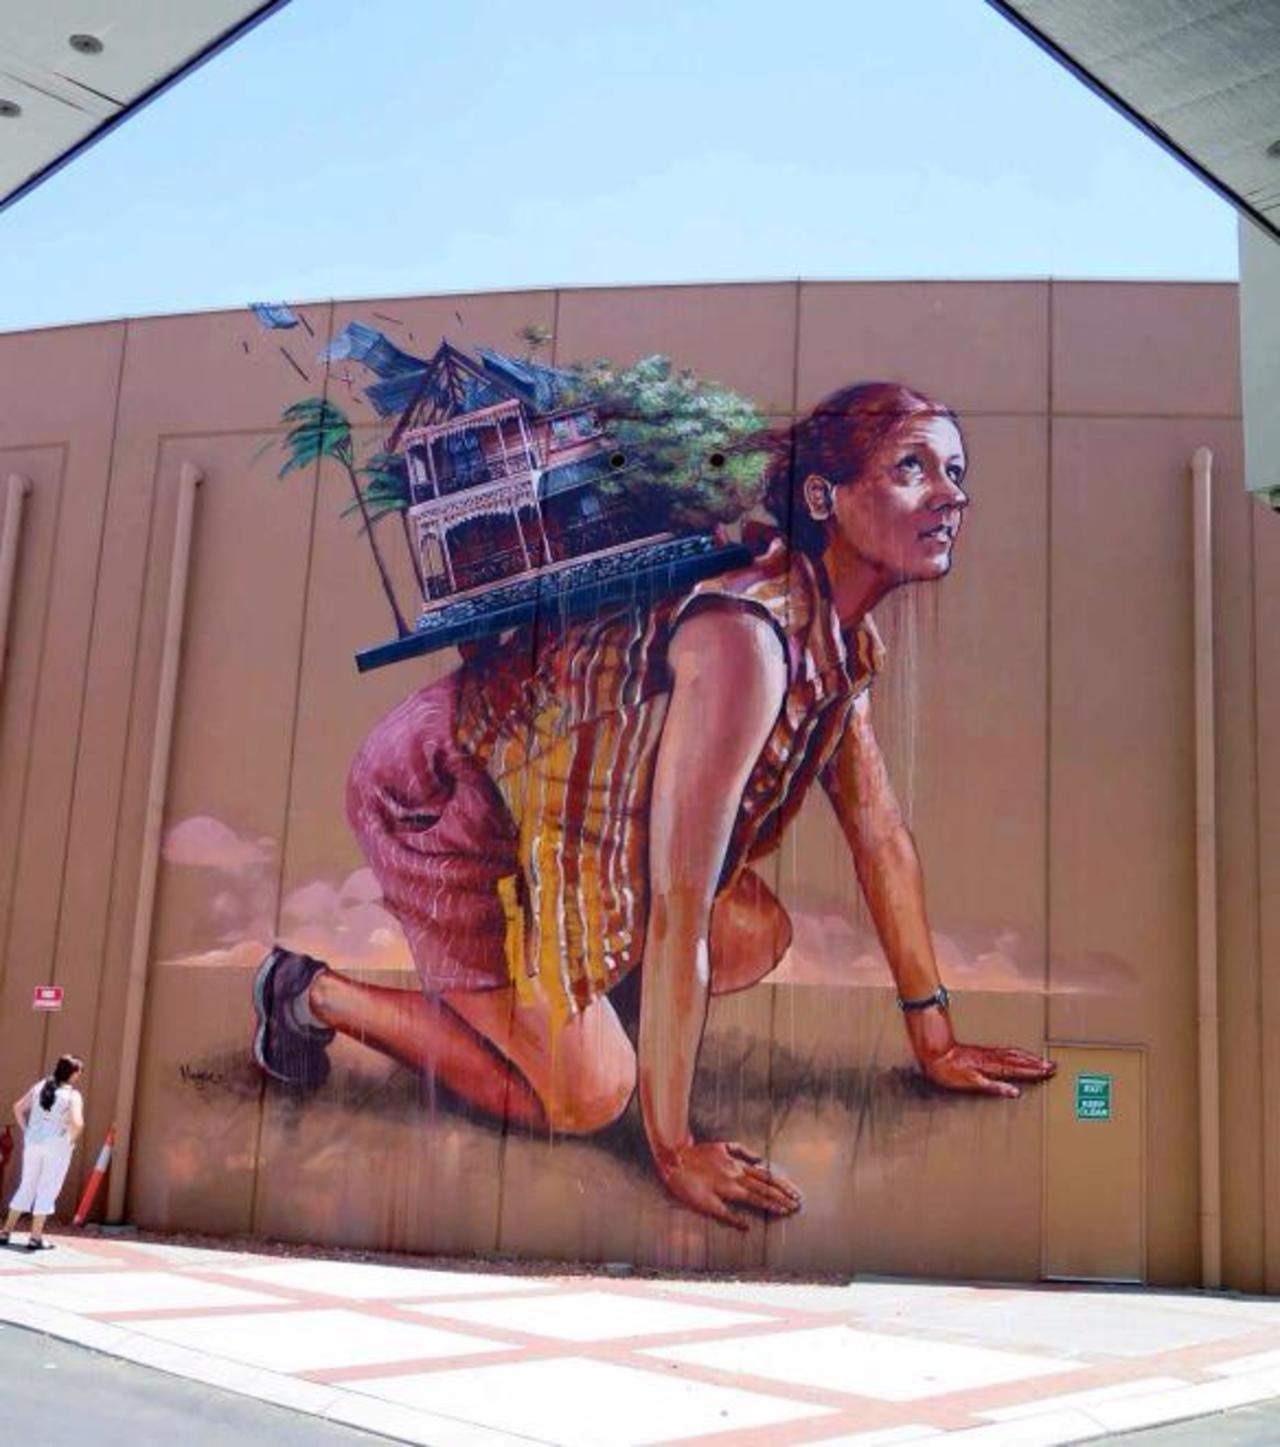 Beautiful surreal #streetart piece entitled "The Storm" by #mural artist Fintan Magee #art

http://wp.me/p2dpFM-2wf http://t.co/gLuHClXHEB